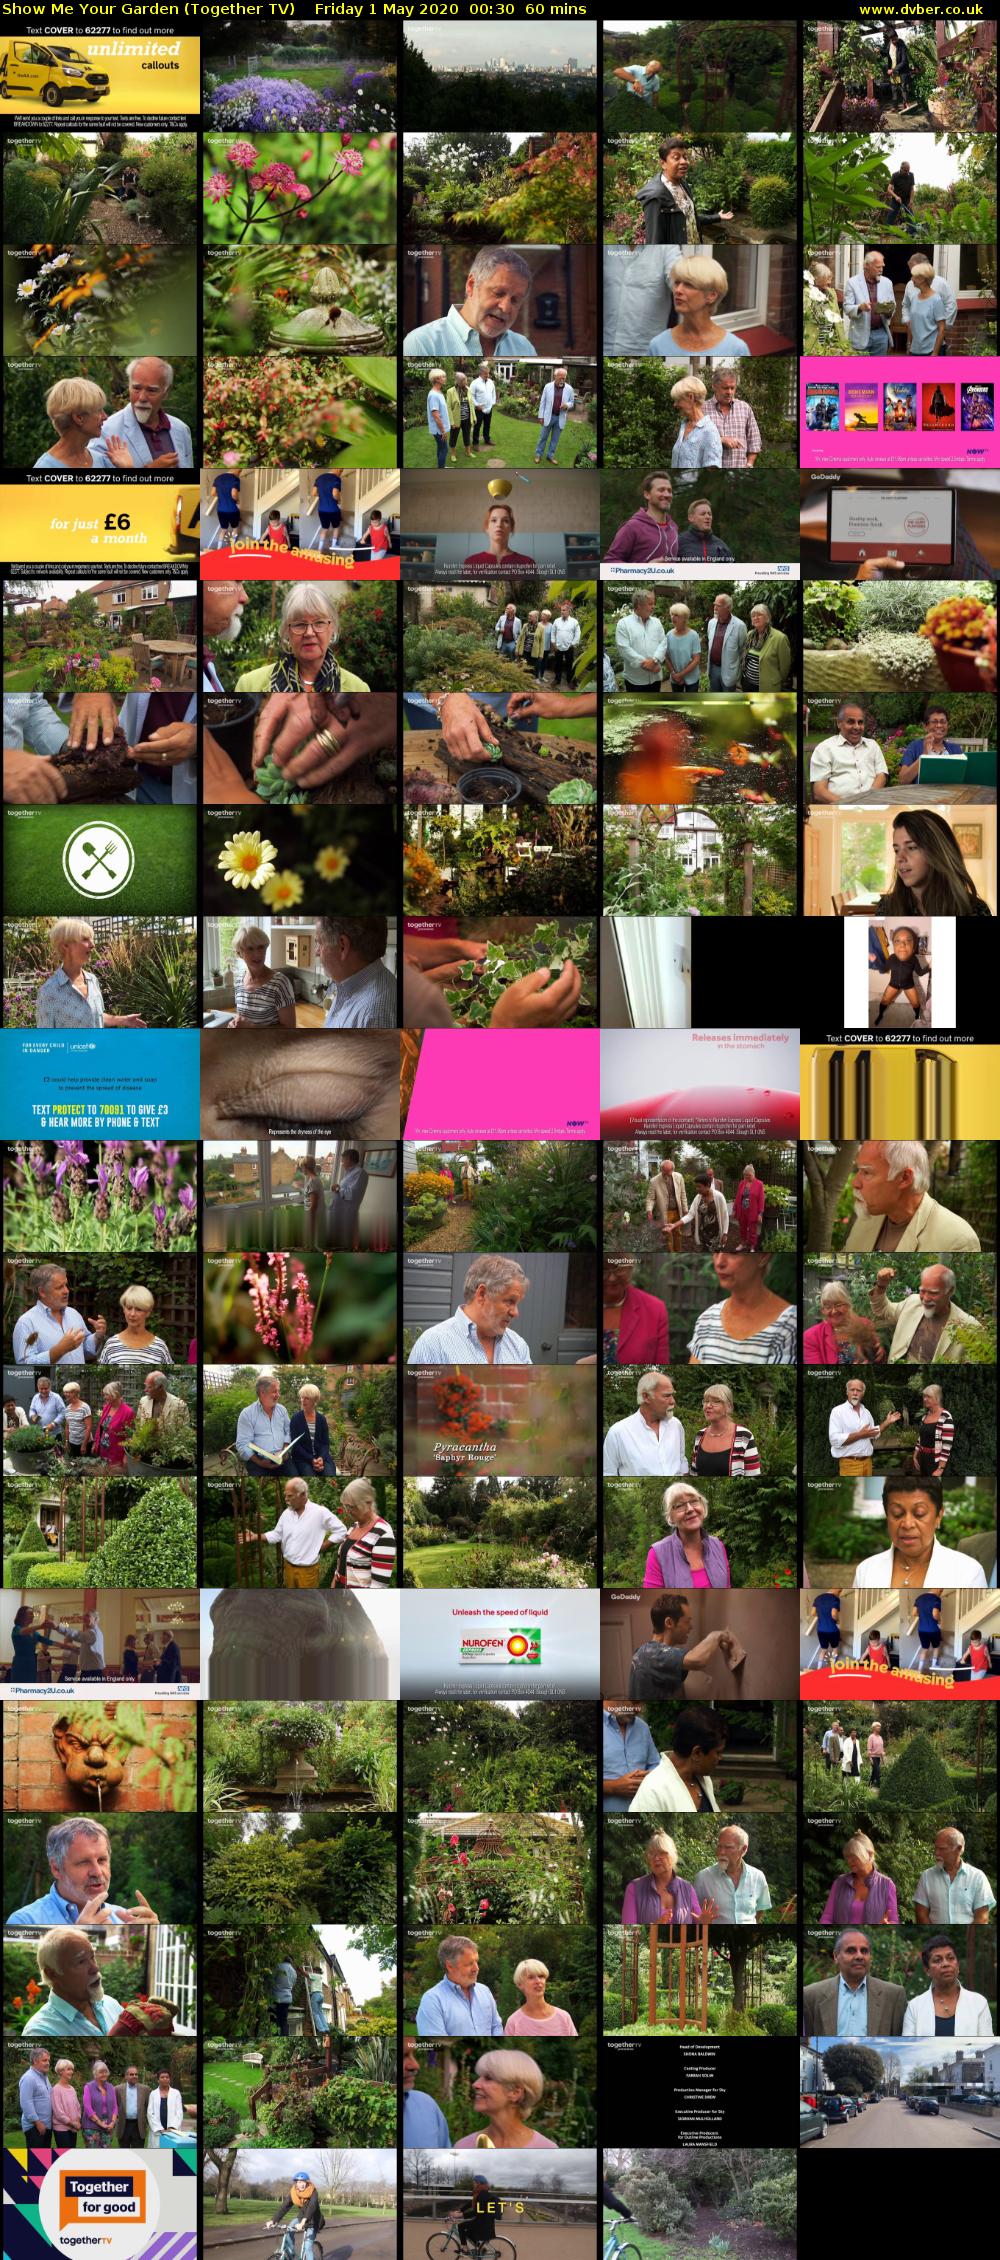 Show Me Your Garden (Together TV) Friday 1 May 2020 00:30 - 01:30